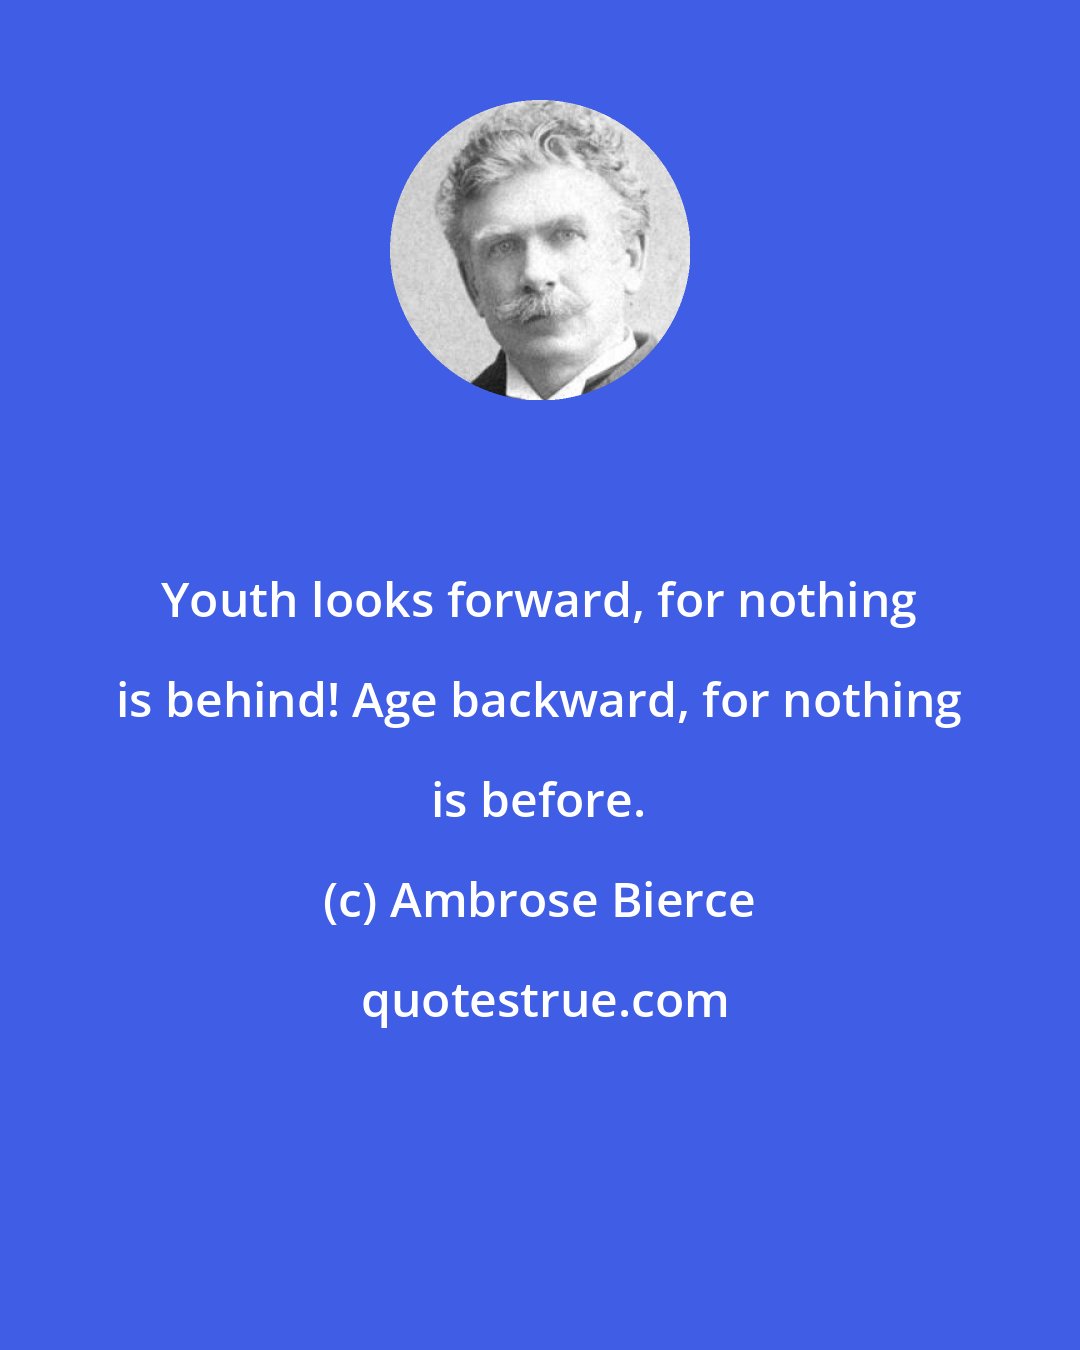 Ambrose Bierce: Youth looks forward, for nothing is behind! Age backward, for nothing is before.